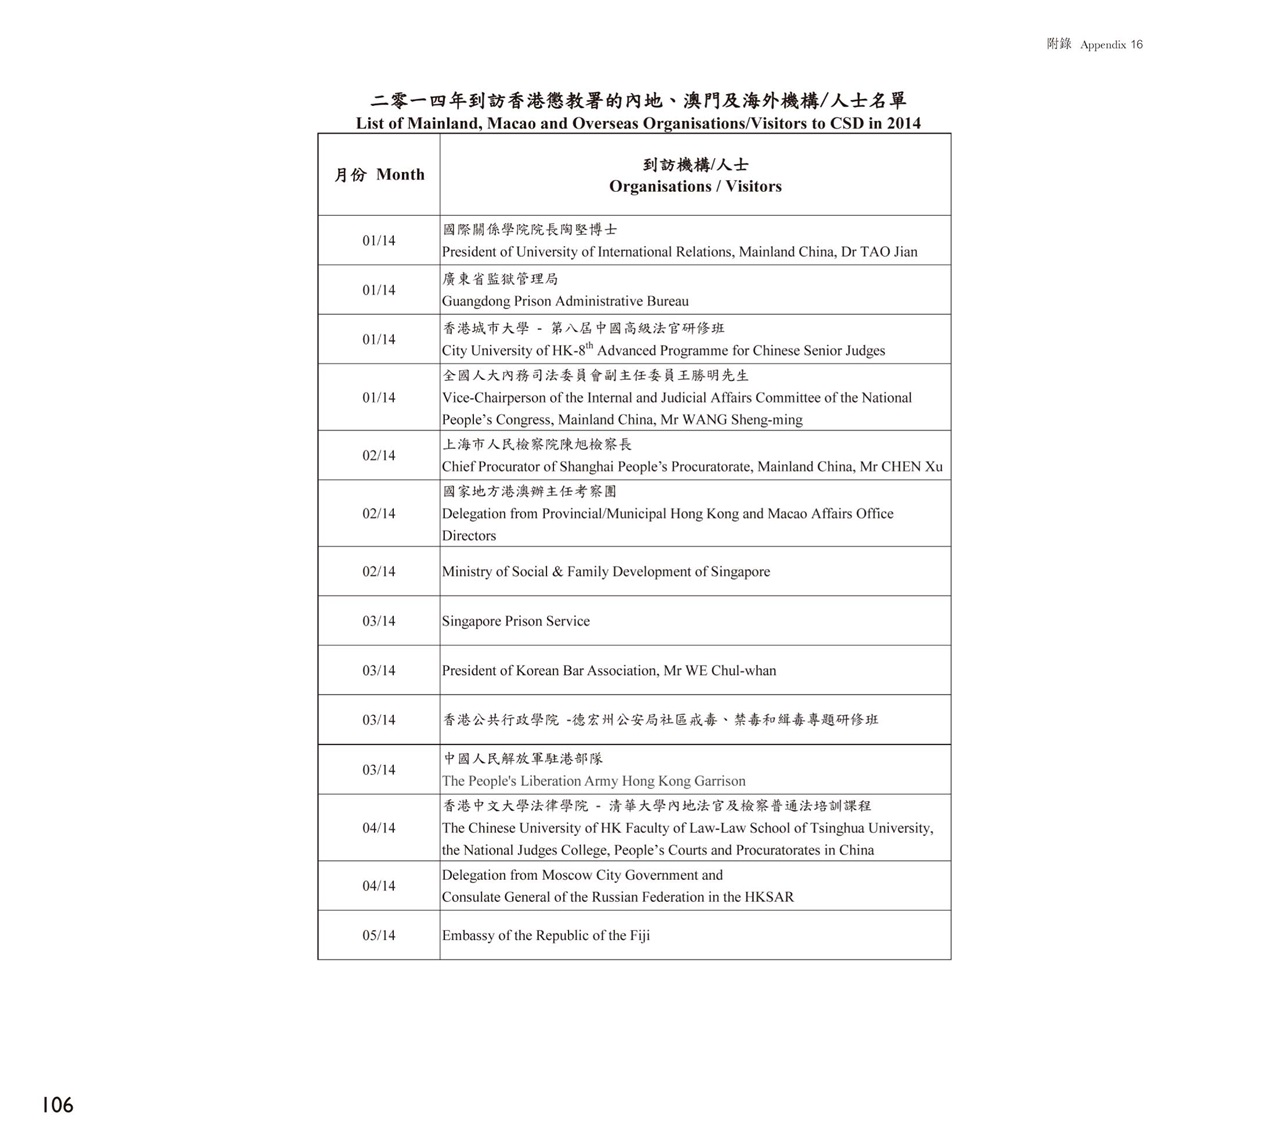 List of Mainland, Macao and Overseas Organisations/Visitors to CSD in 2014